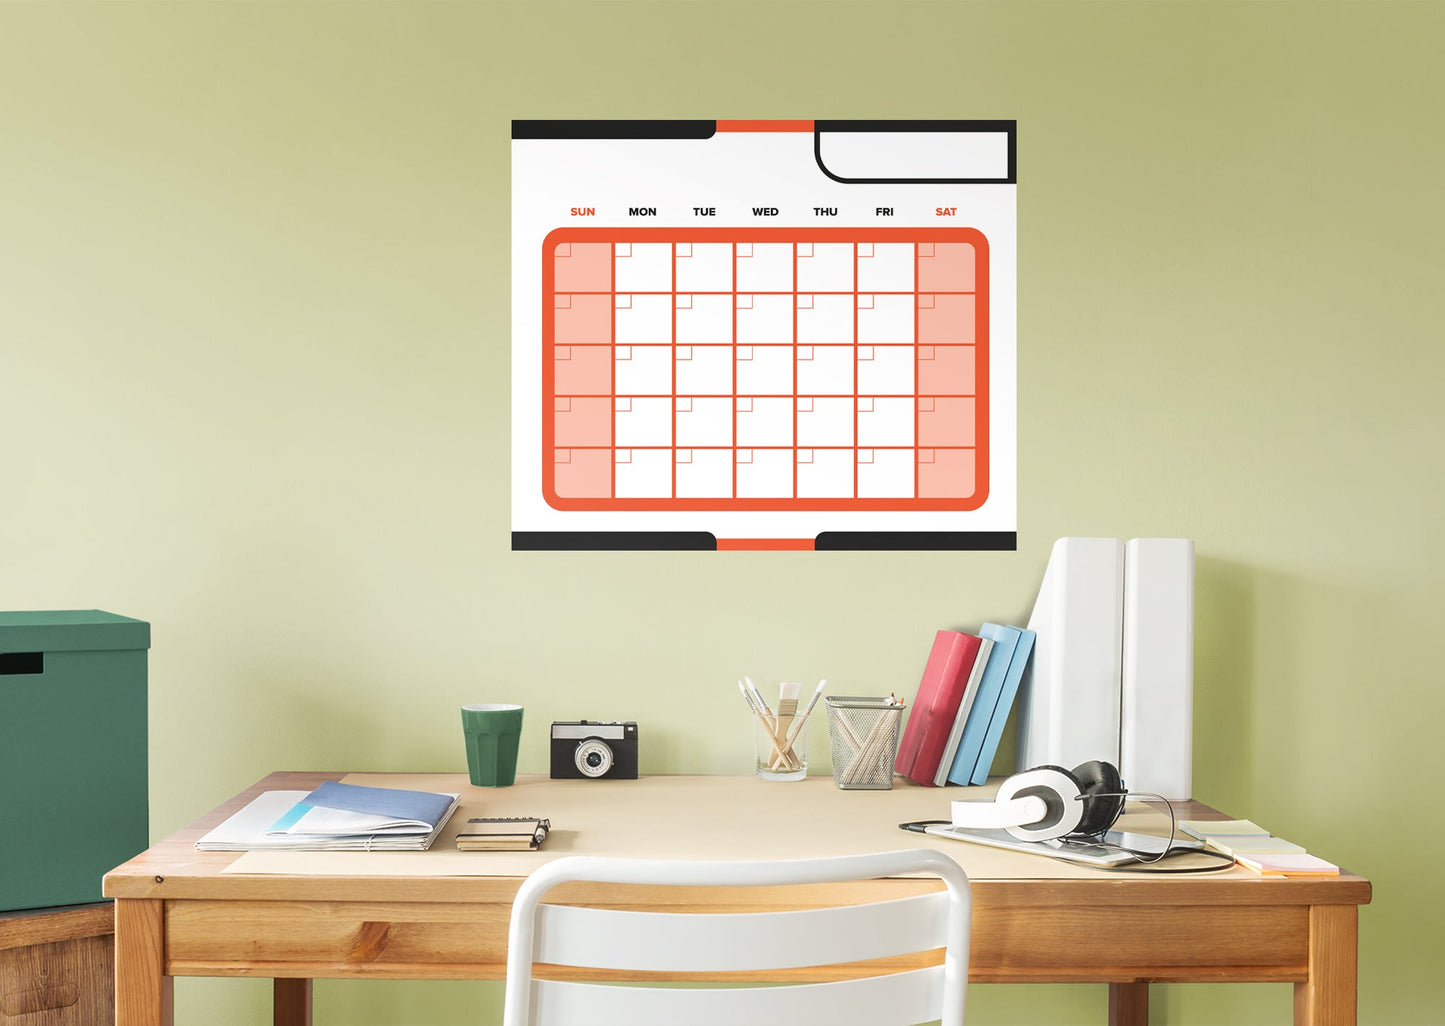 Calendars: Black and Red Modern One Month Calendar Dry Erase - Removable Adhesive Decal